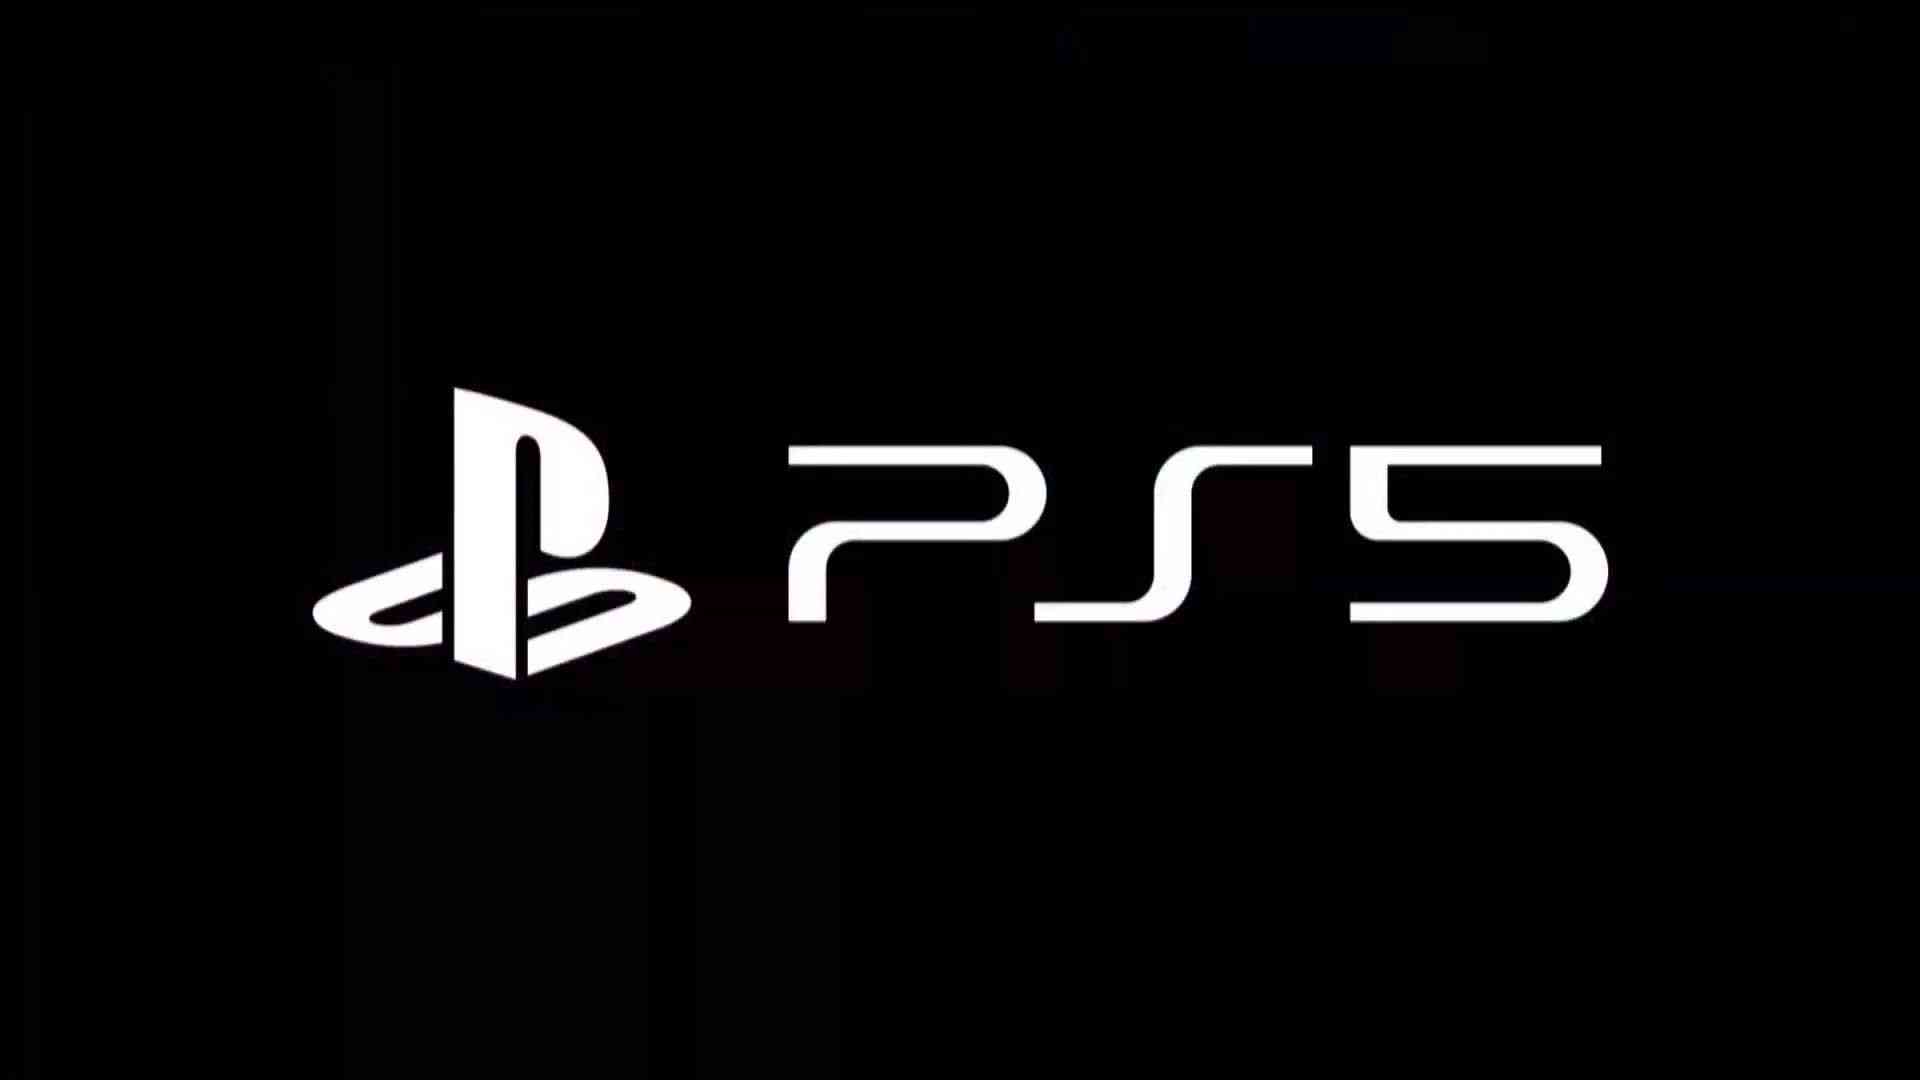 ps5 specifications come from mark cerny 3992 big 1